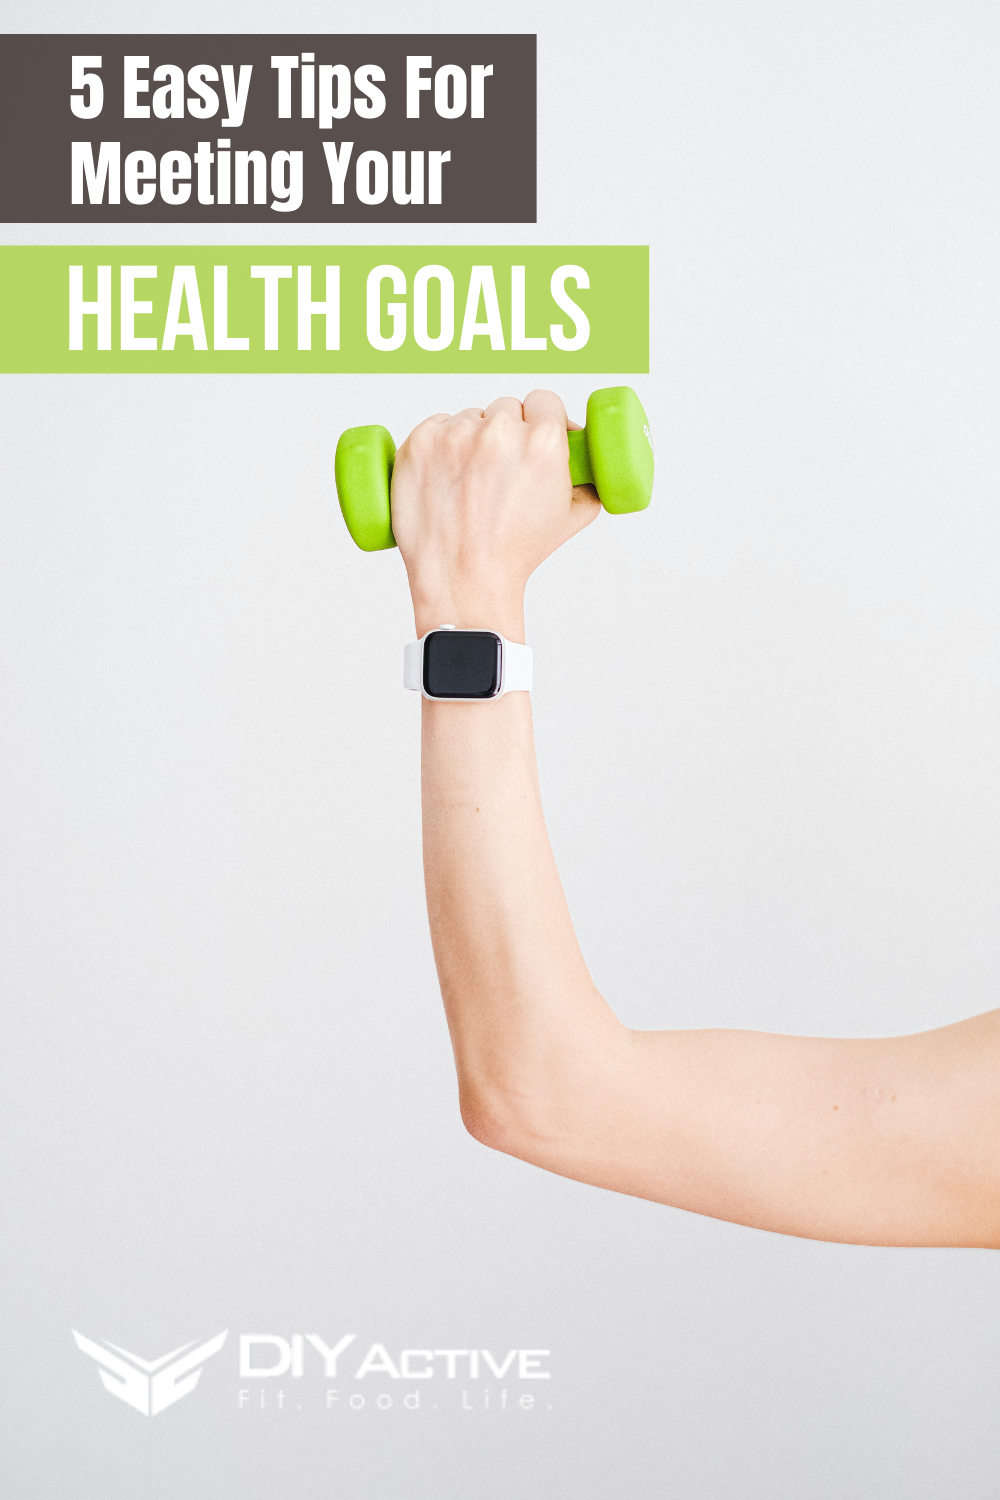 5 Easy Tips For Meeting Your Health Goals